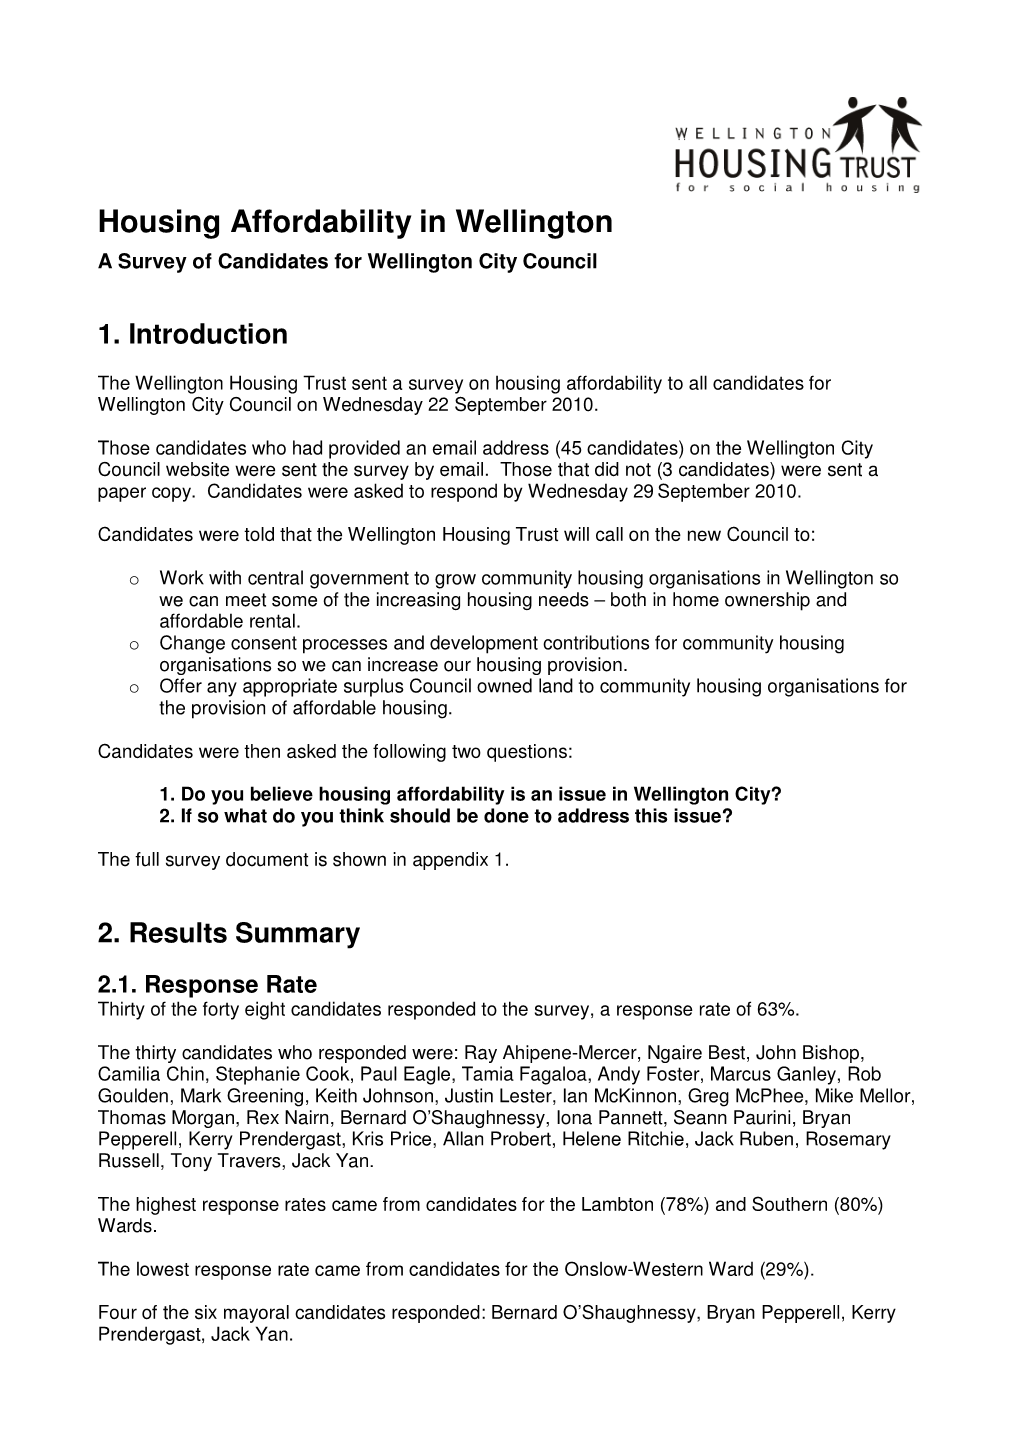 Housing Affordability in Wellington a Survey of Candidates for Wellington City Council